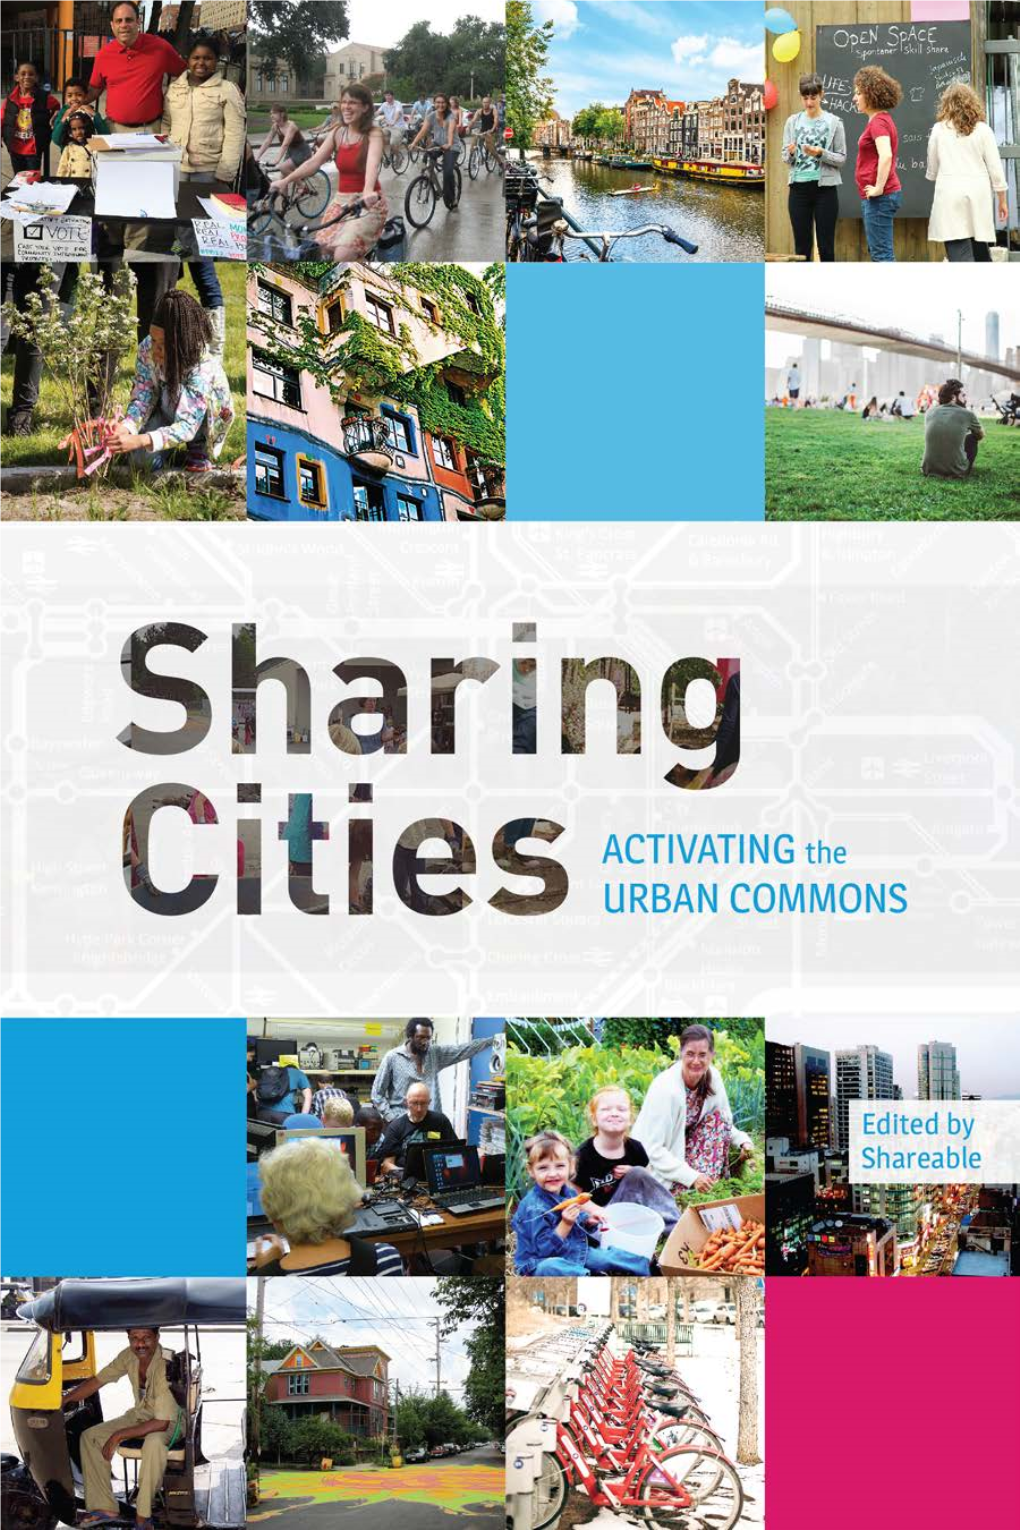 Sharing Cities: Activating the Urban Commons” by Shareable Is Licensed Under a Cre- Ative Commons Attribution-Sharealike 4.0 International License (CC BY-SA 4.0)